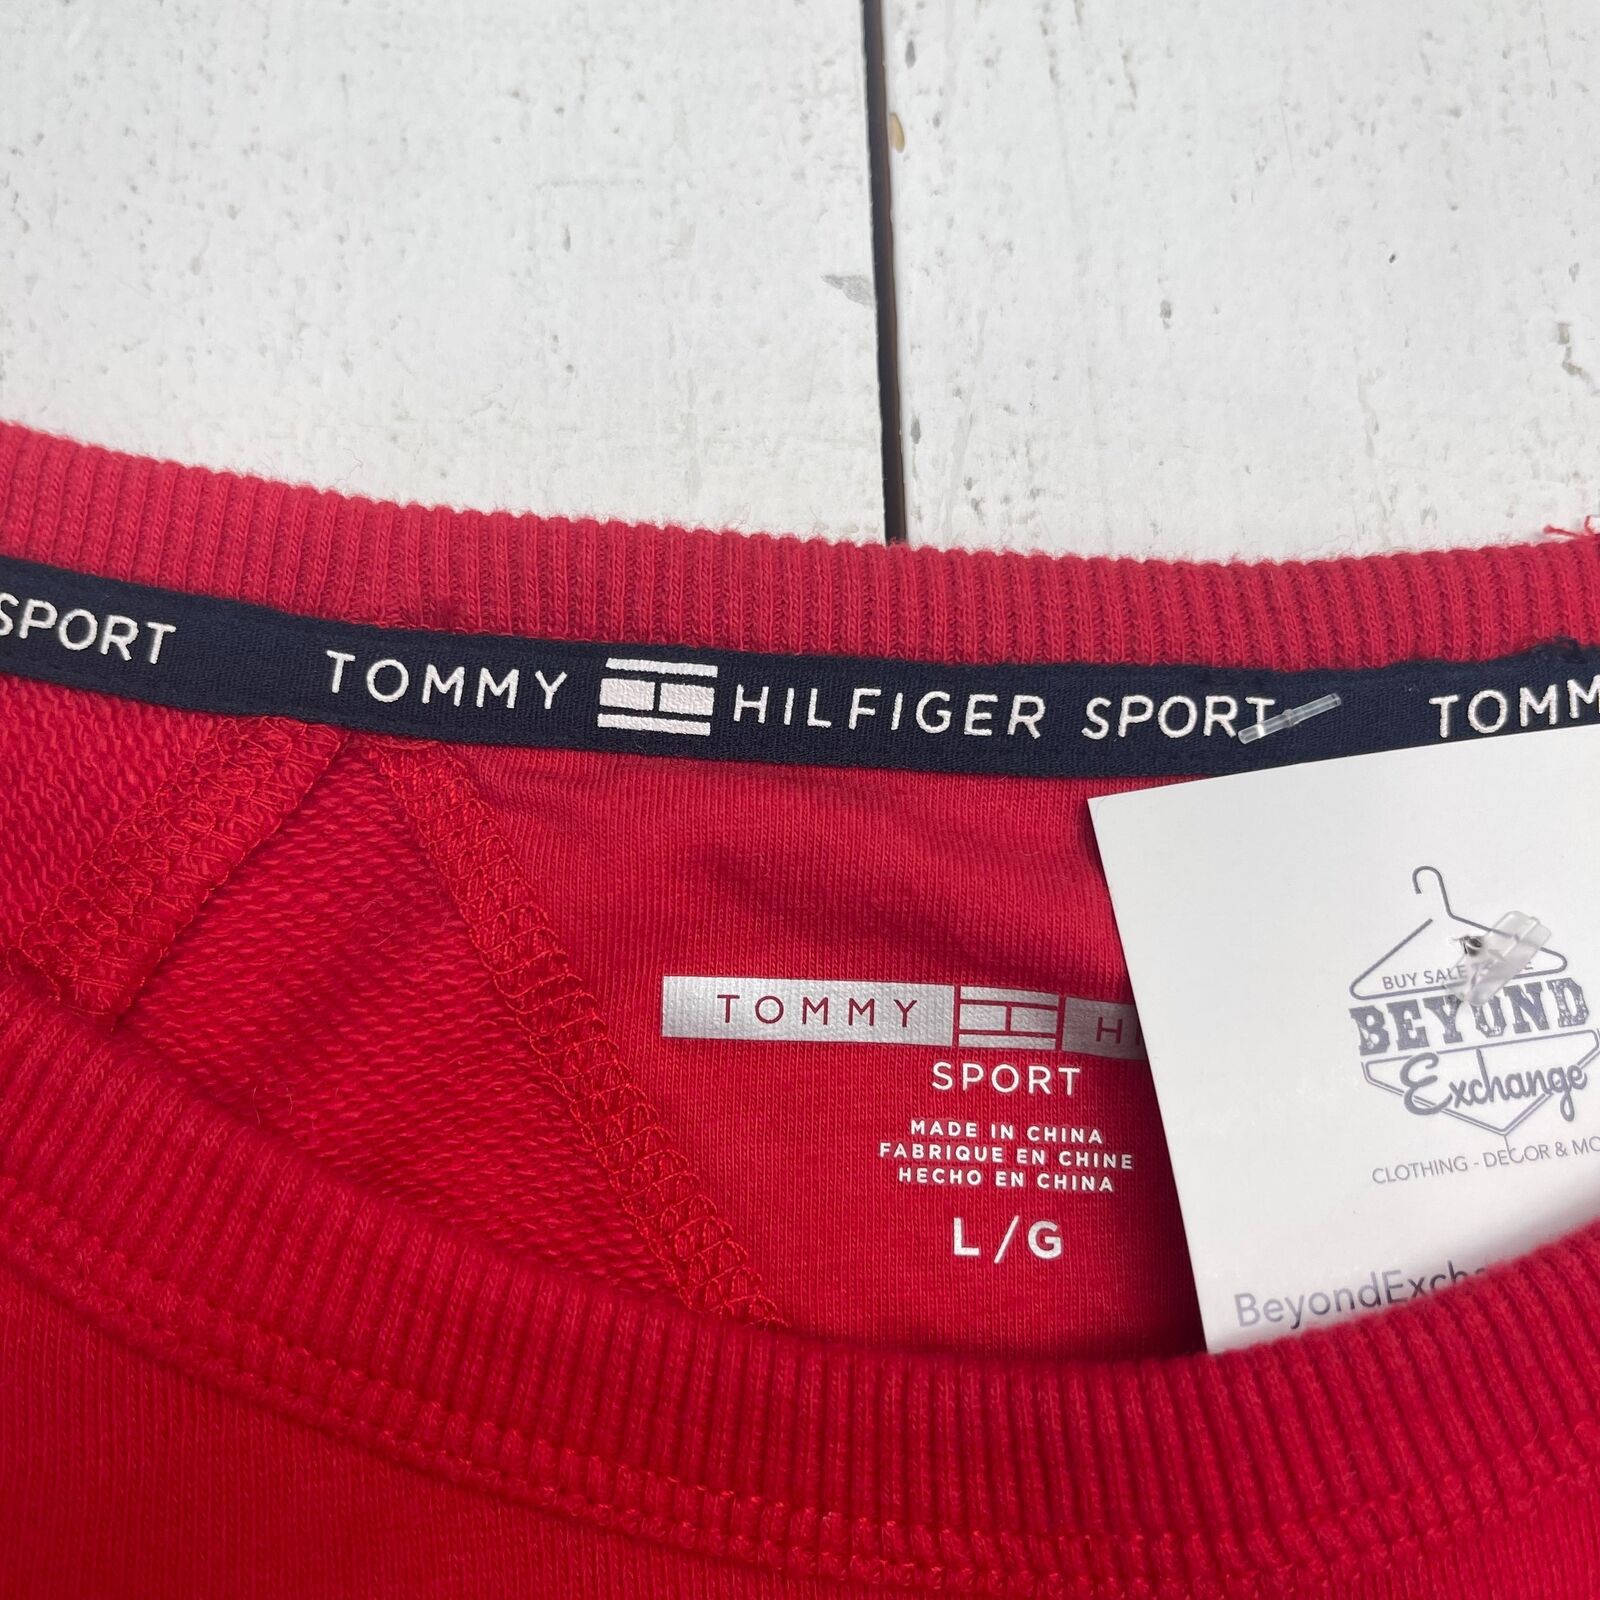 Tommy Hilfiger Sport Red Spellout Long Sleeve Sweater Women\'s Size Lar -  beyond exchange